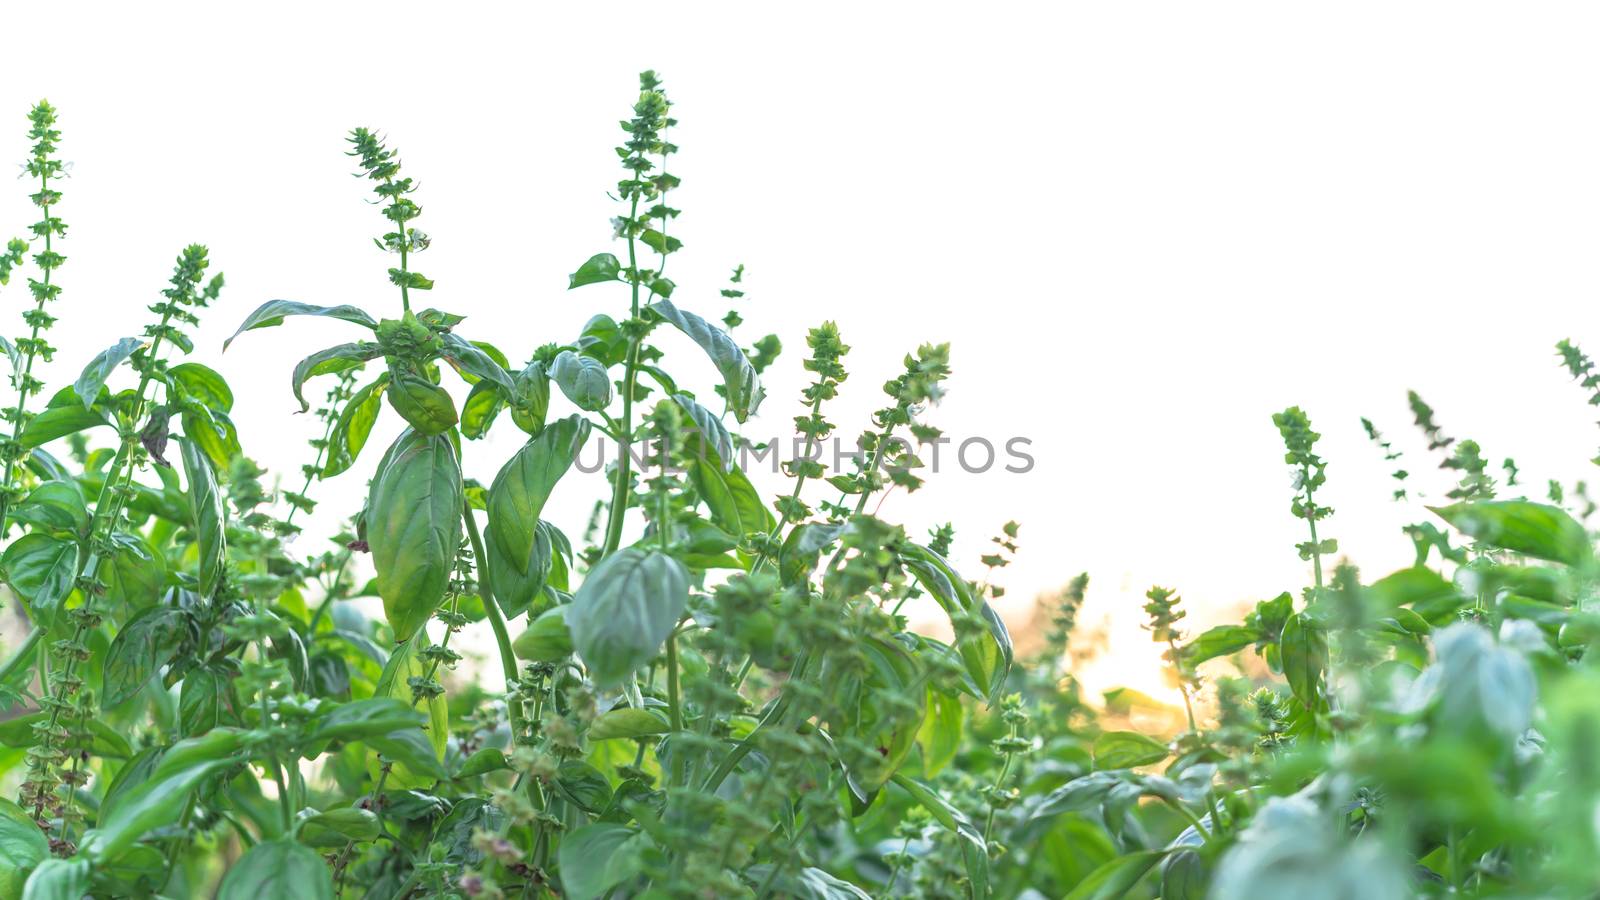 Flowering sweet basil plants with nature backlit isolated on white background. Blossom homegrown Lamiaceae culinary herb at organic backyard garden in Texas, America